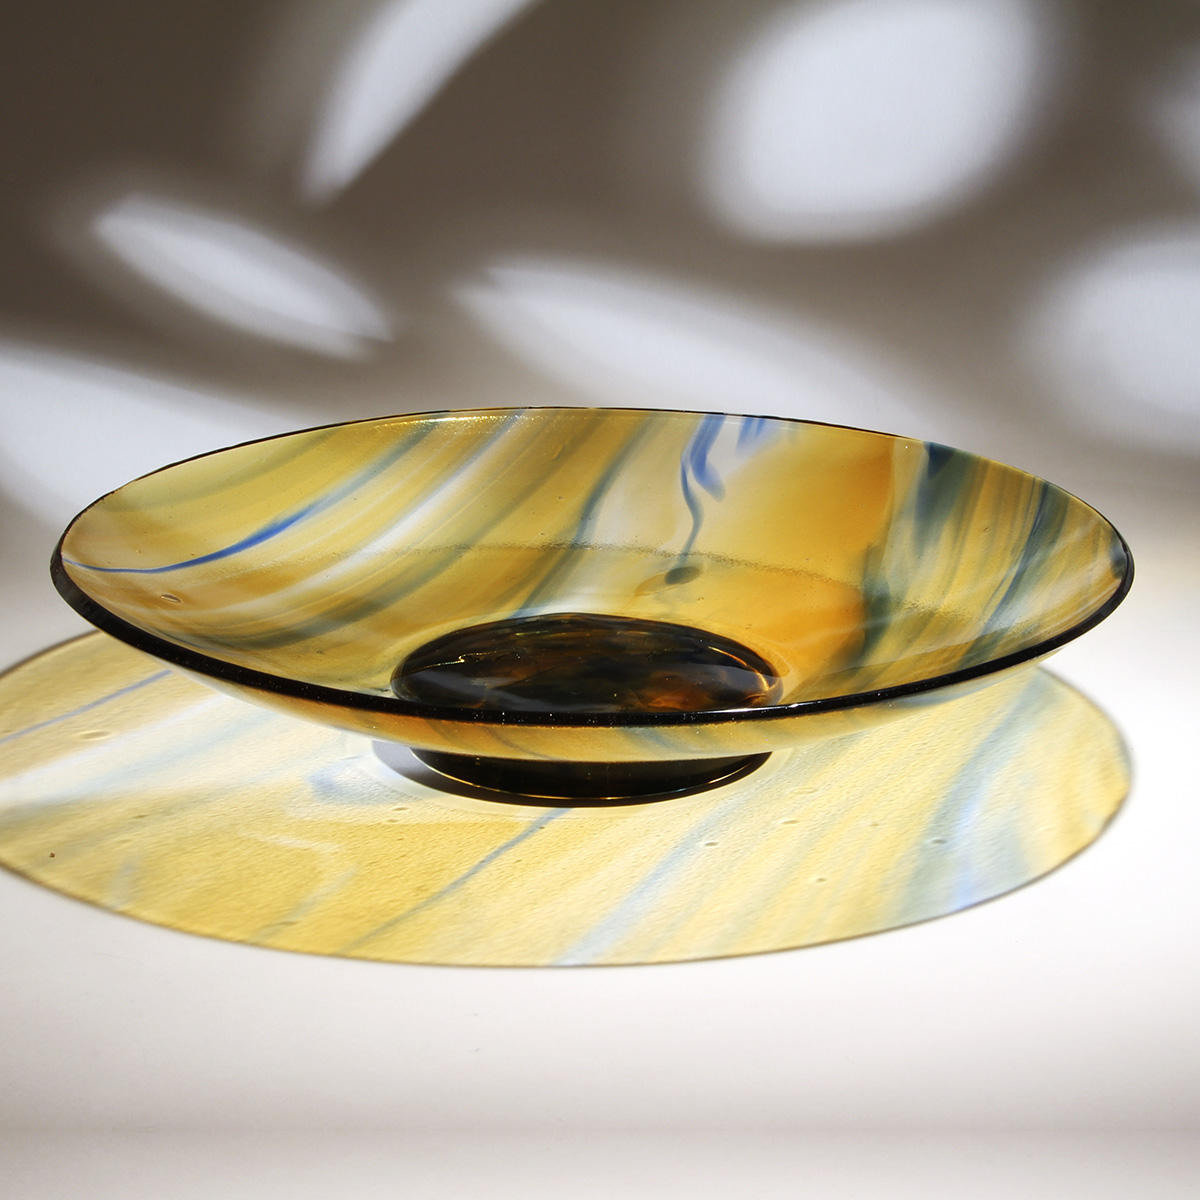 French Curve – Art Glass Love by Wardell